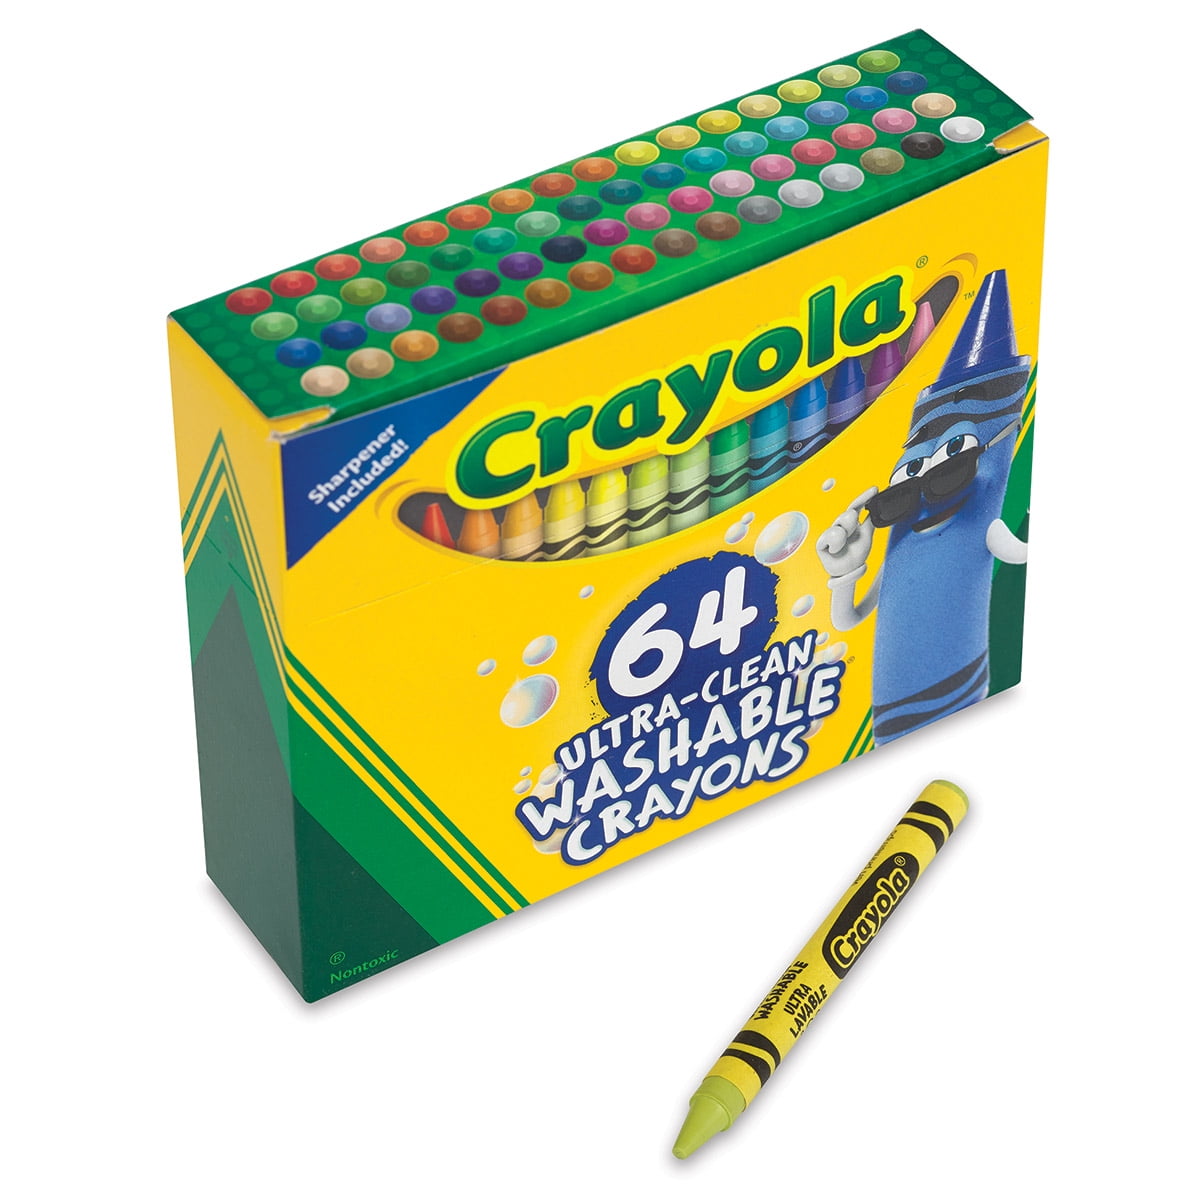  Crayola Bulk Ultra Clean Washable Crayons, Back to School  Supplies, 12 Packs of 24 Count : Toys & Games